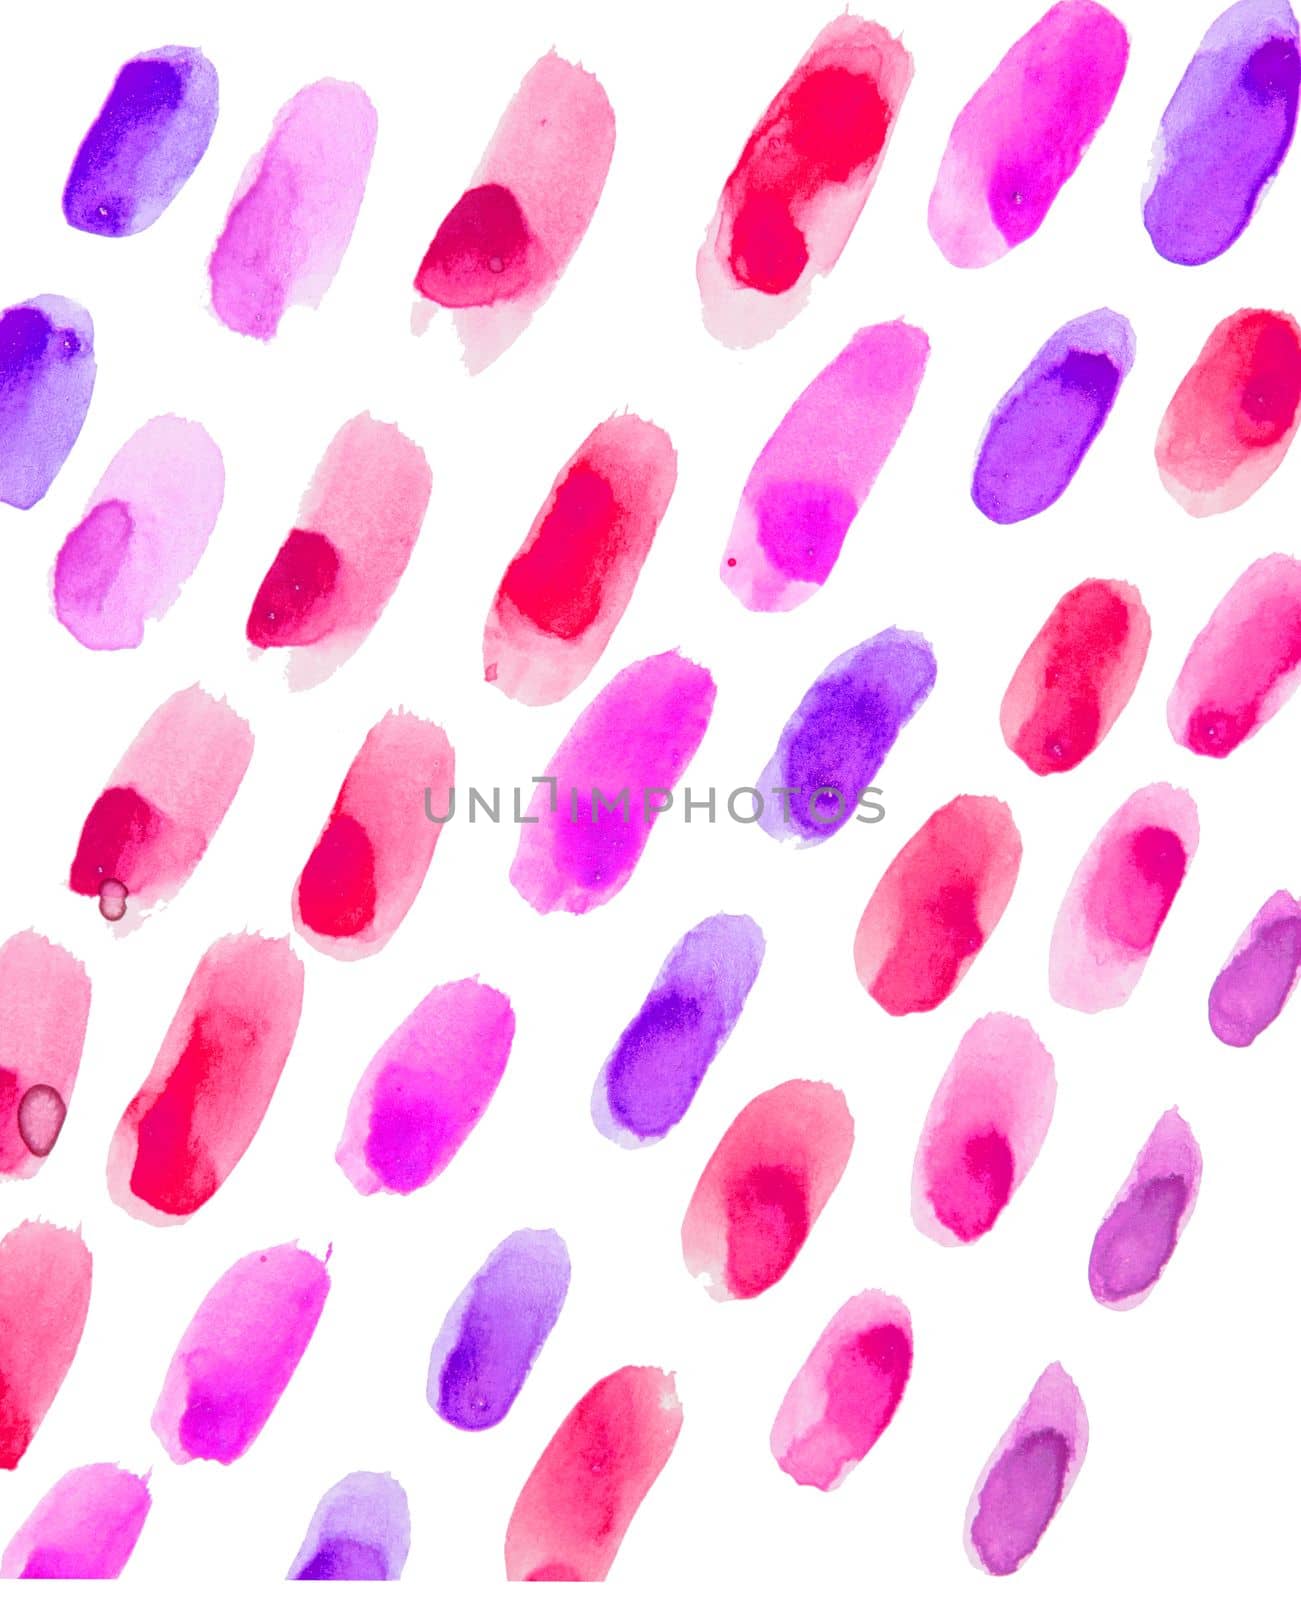 Watercolor rows drawn with a brush consisting of watercolor strokes in shades of trendy bright colors on a white background, vertical.